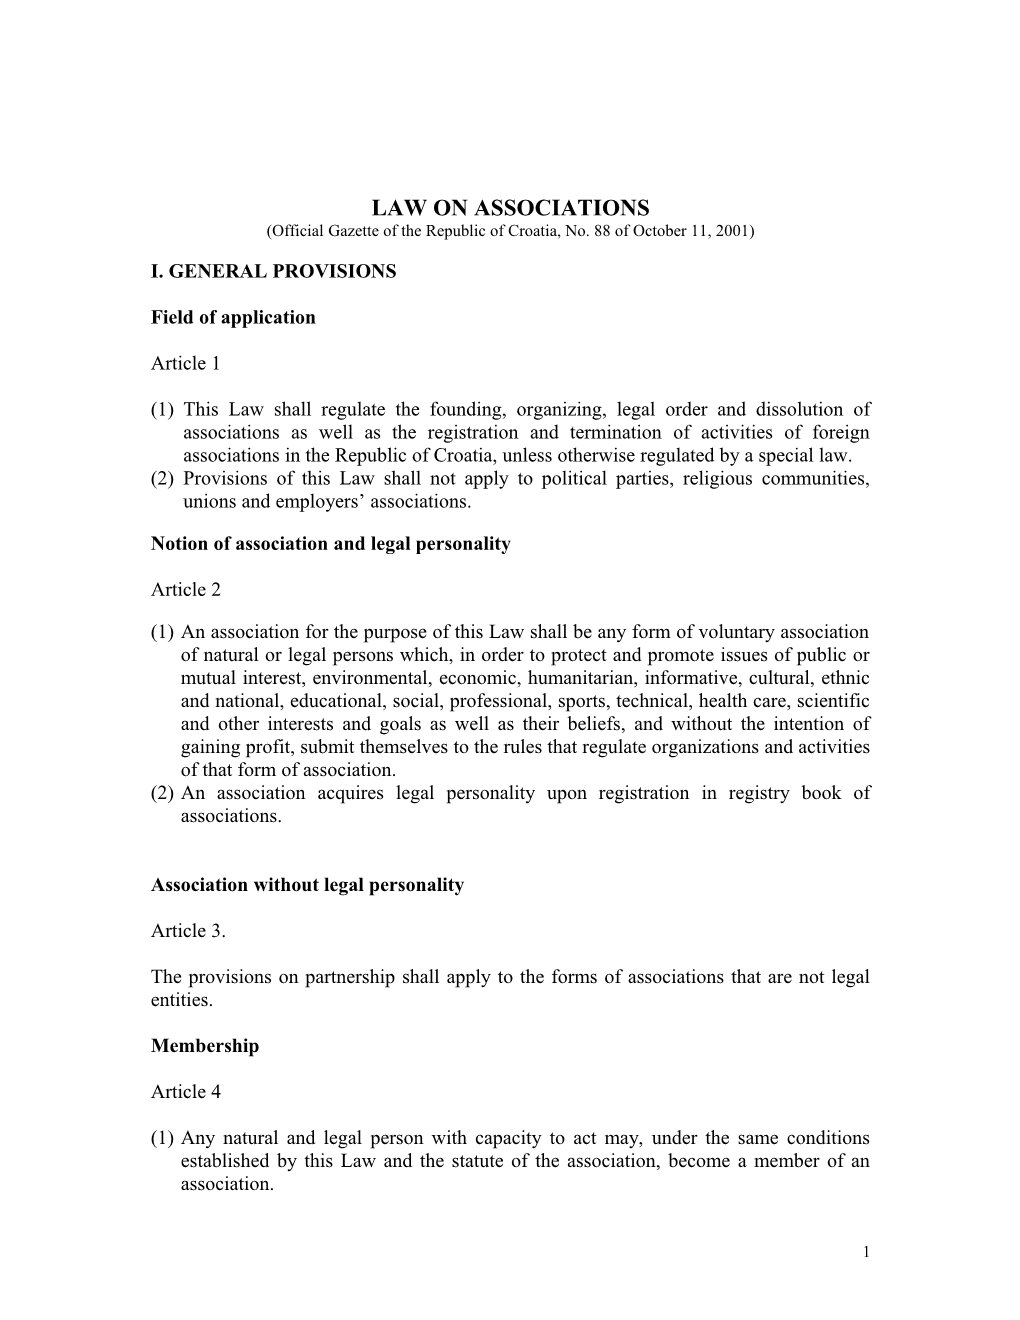 Law on Associations